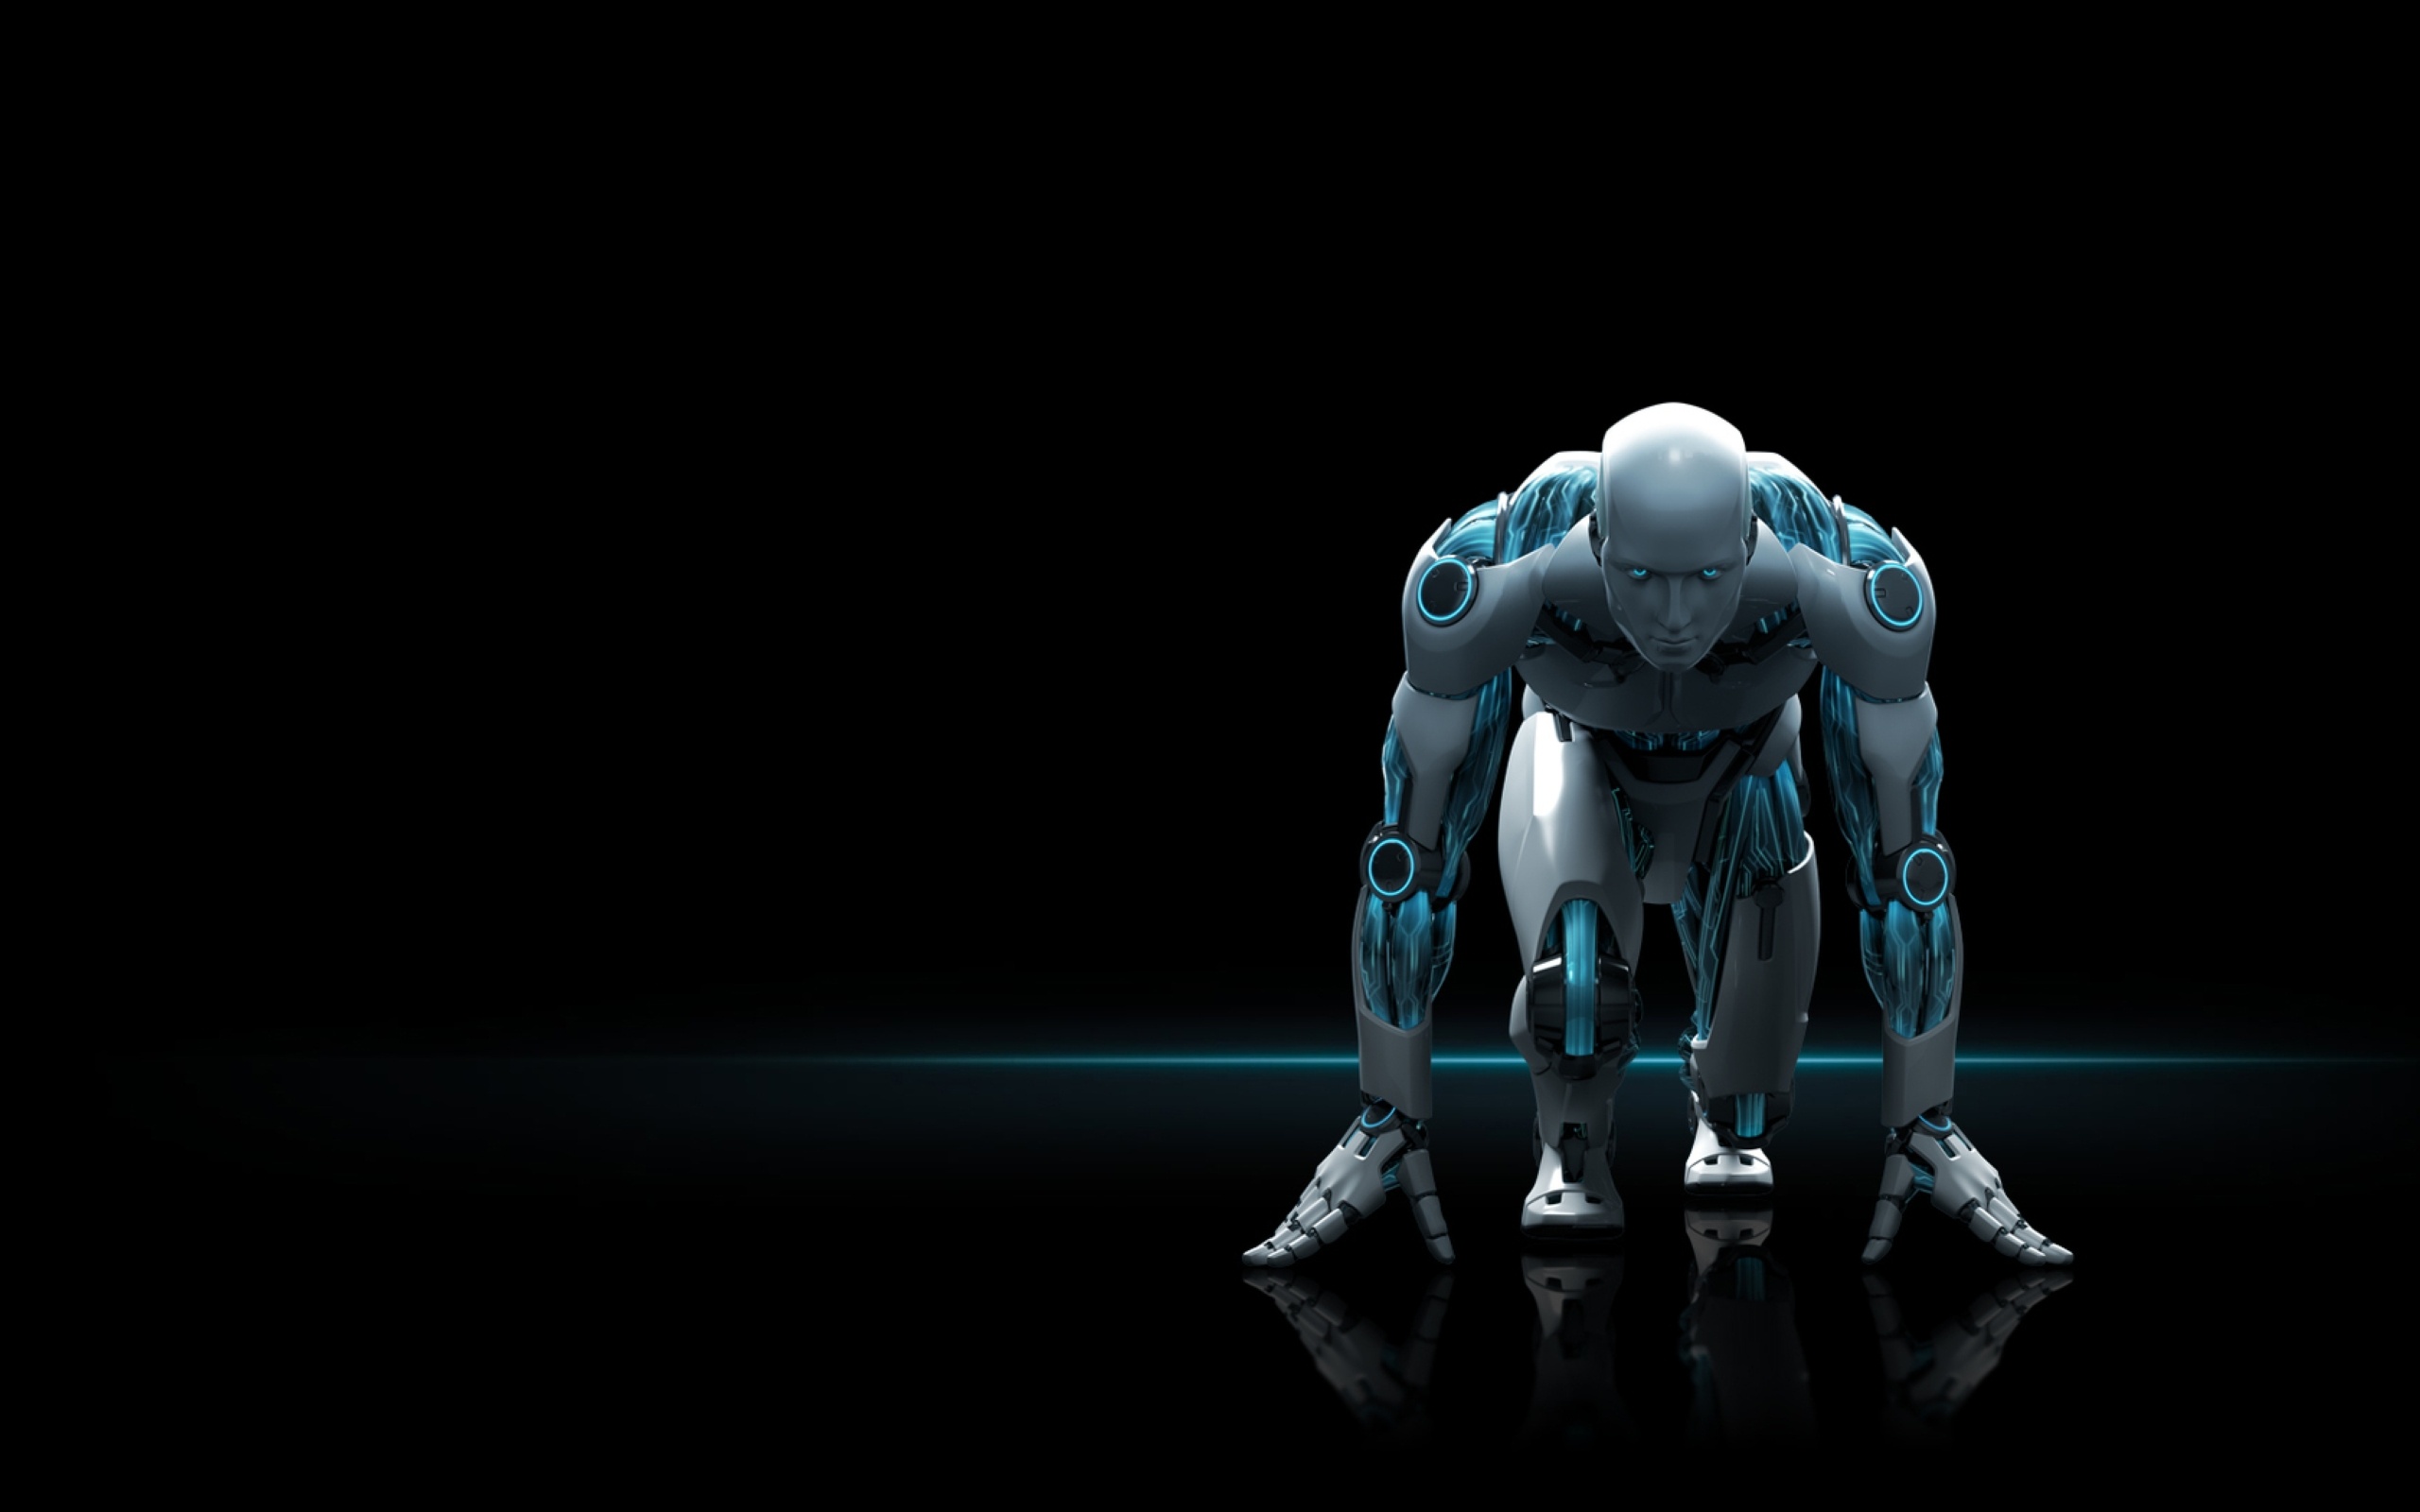 3D Robot Wallpapers Backgrounds For Free Download